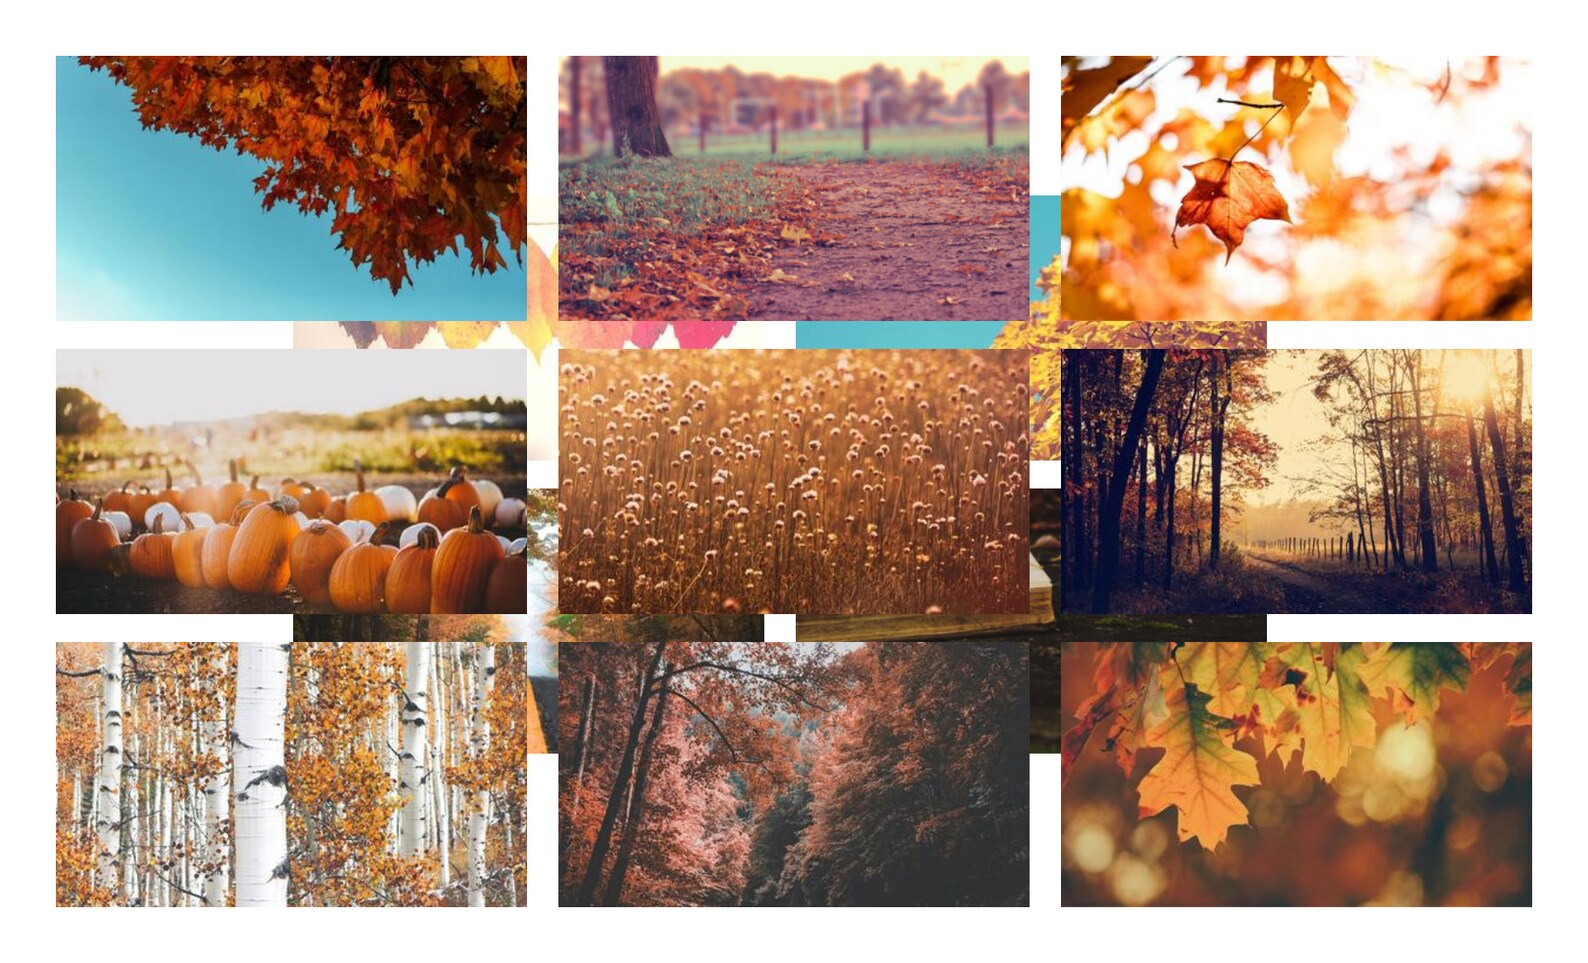 fall zoom backgrounds